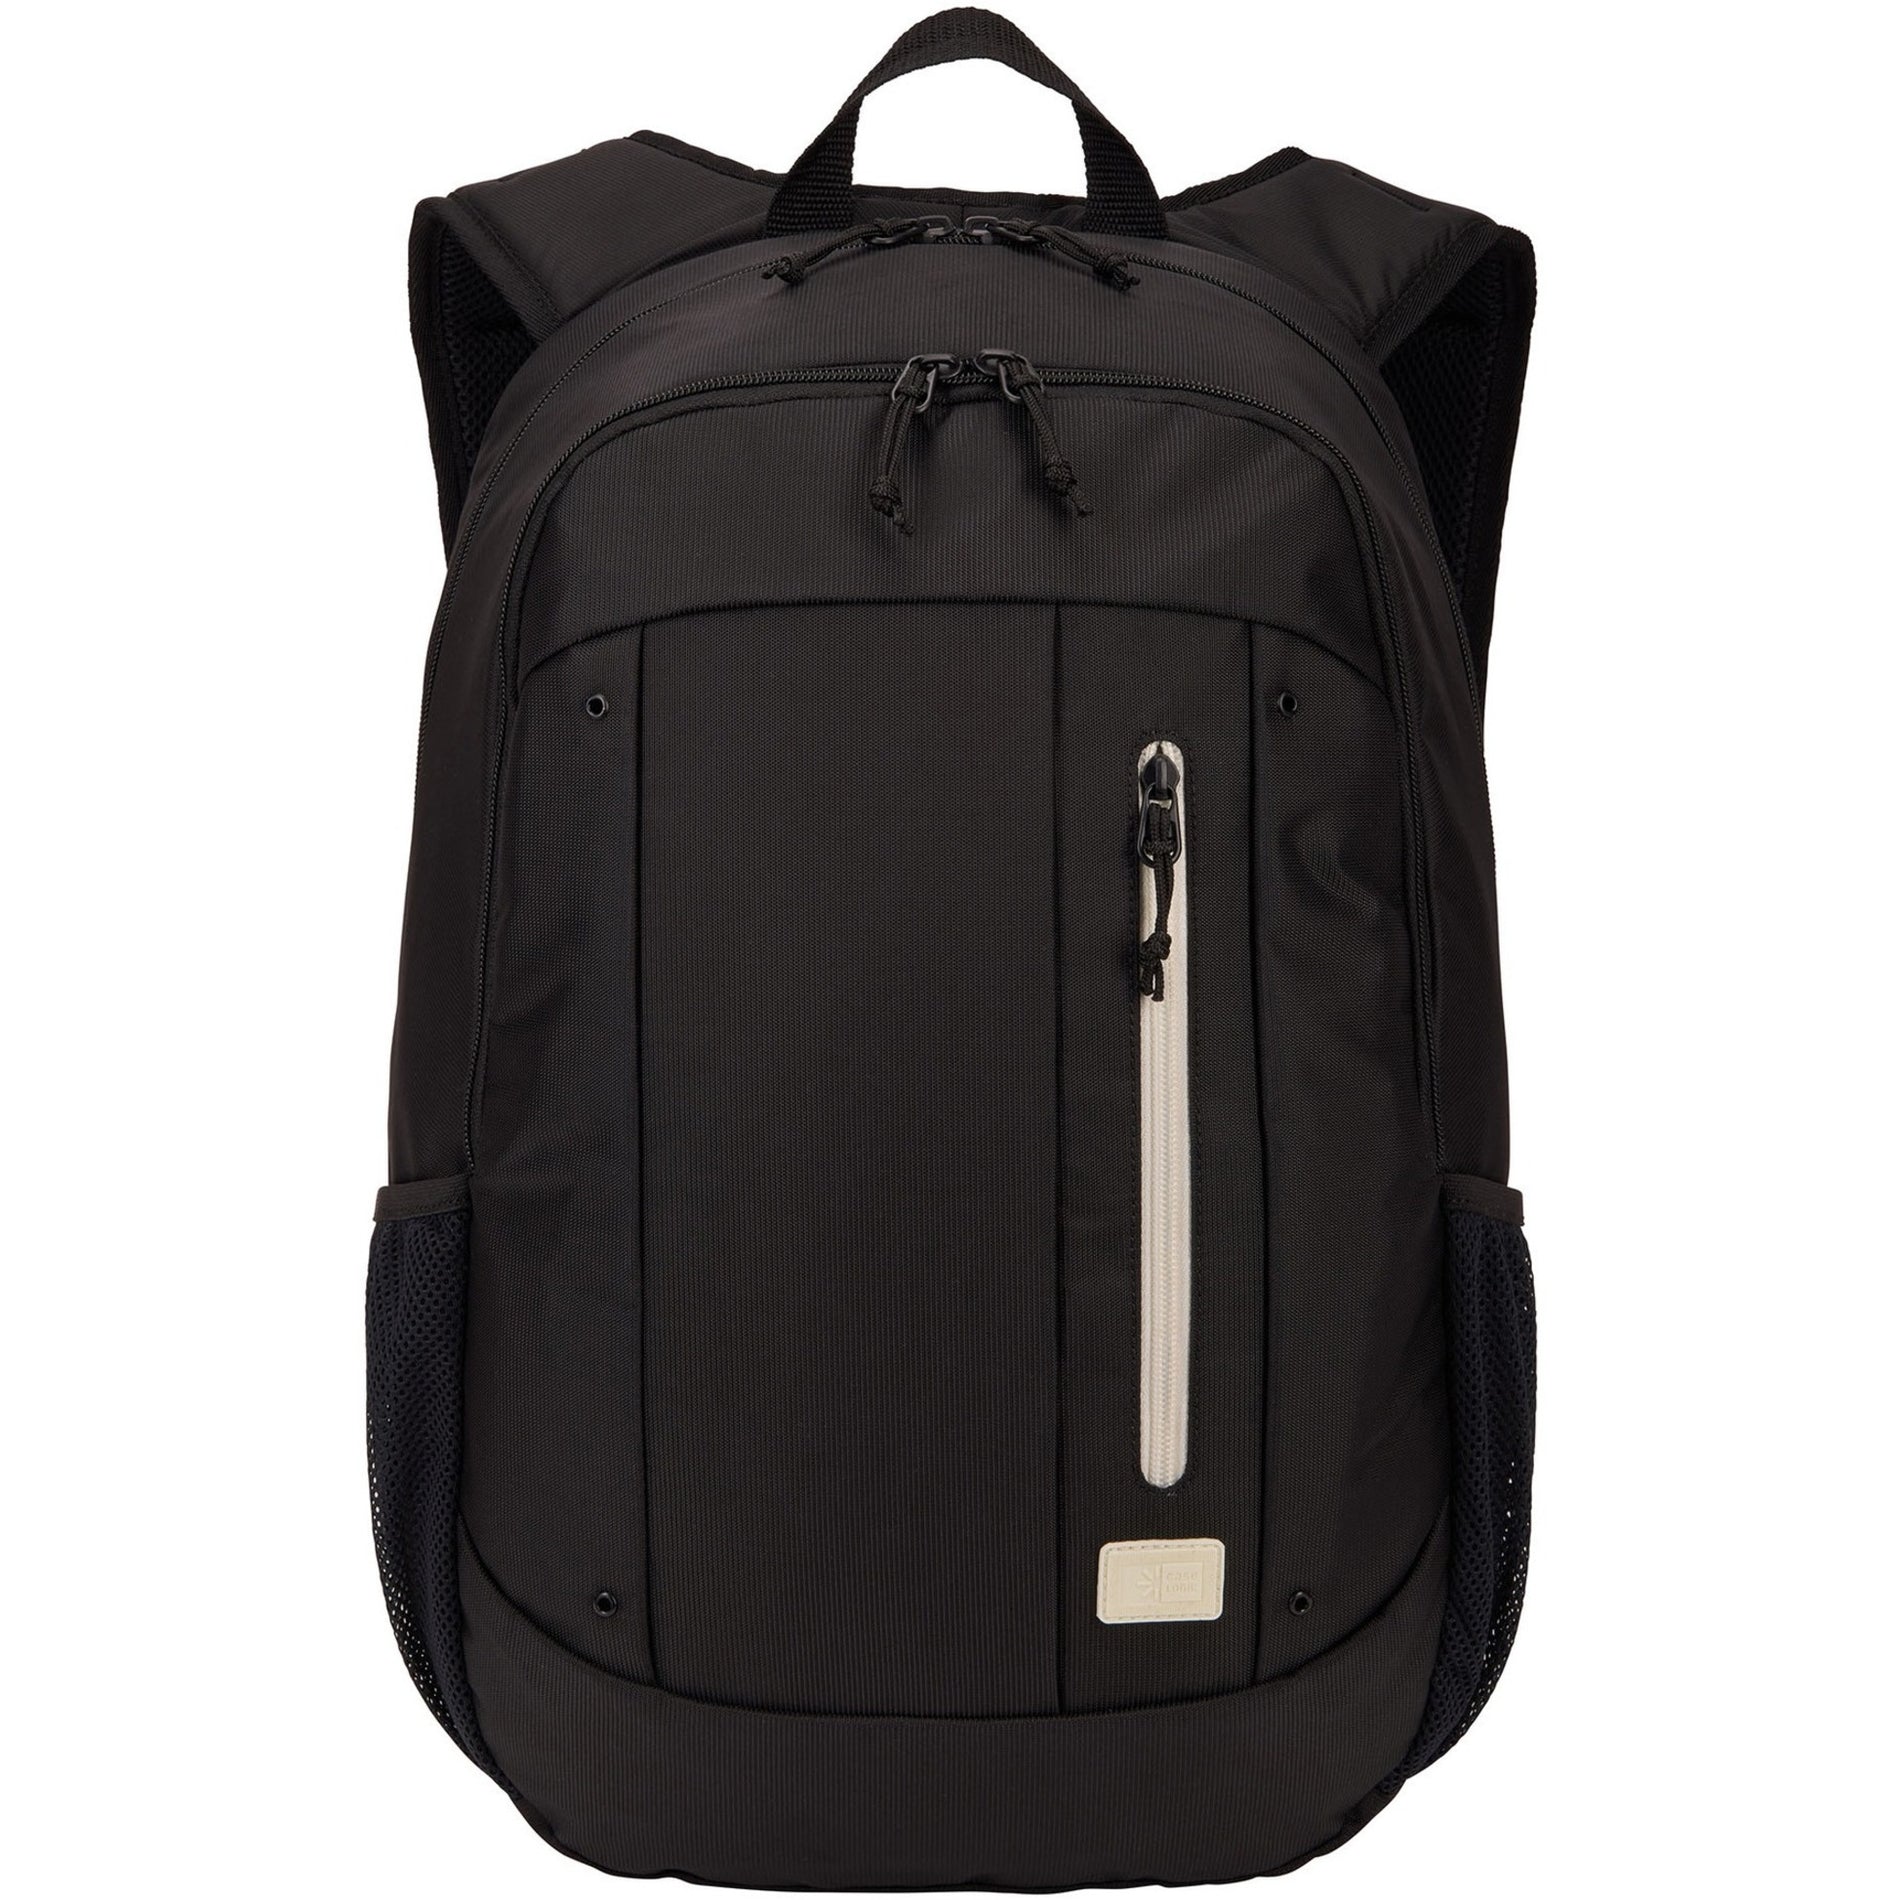 Case Logic 3204869 Jaunt Backpack, Carrying Case for Accessories, Smartphone, Tablet, Notebook